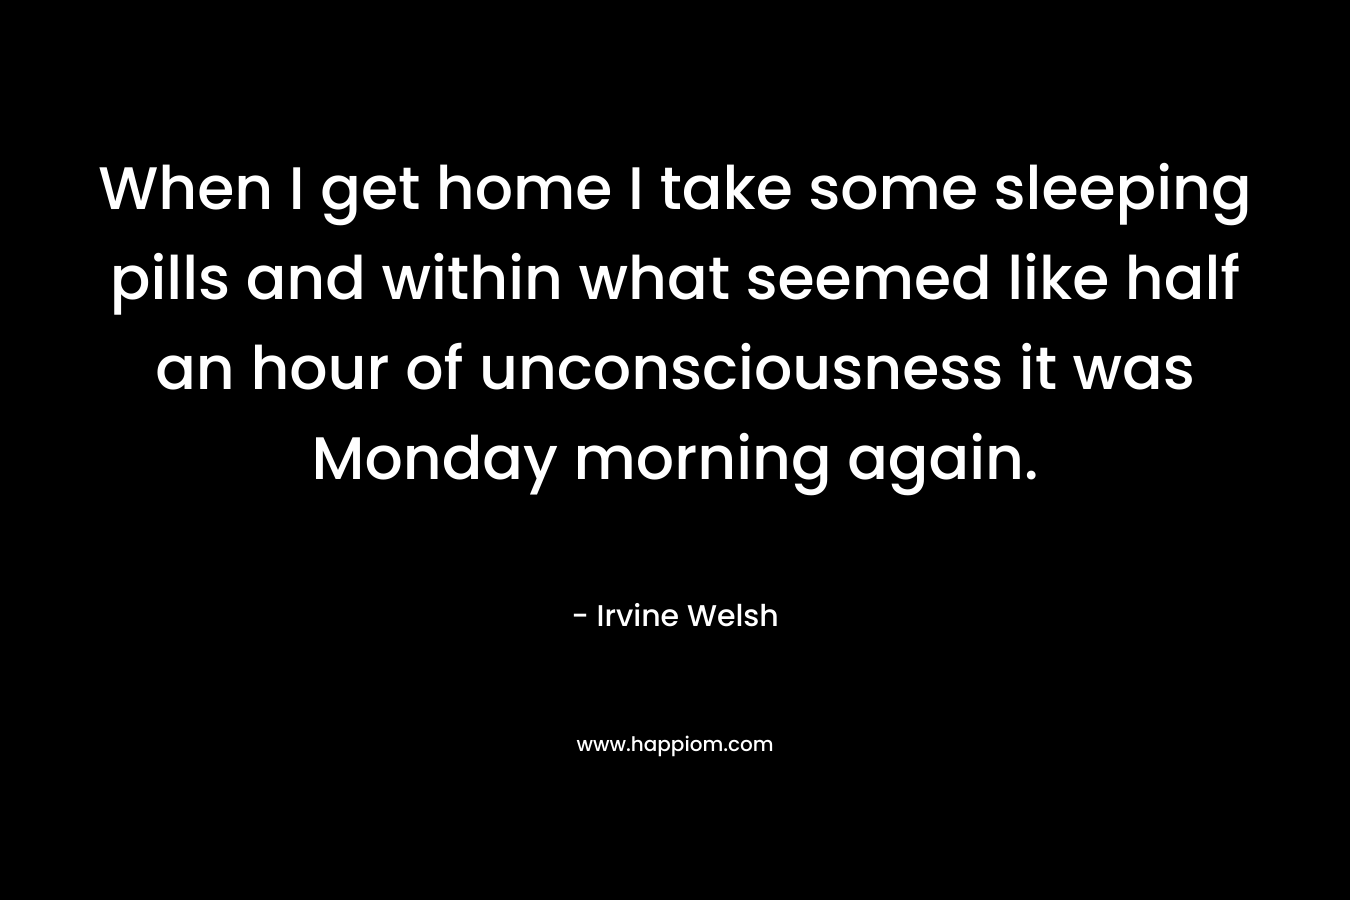 When I get home I take some sleeping pills and within what seemed like half an hour of unconsciousness it was Monday morning again. – Irvine Welsh